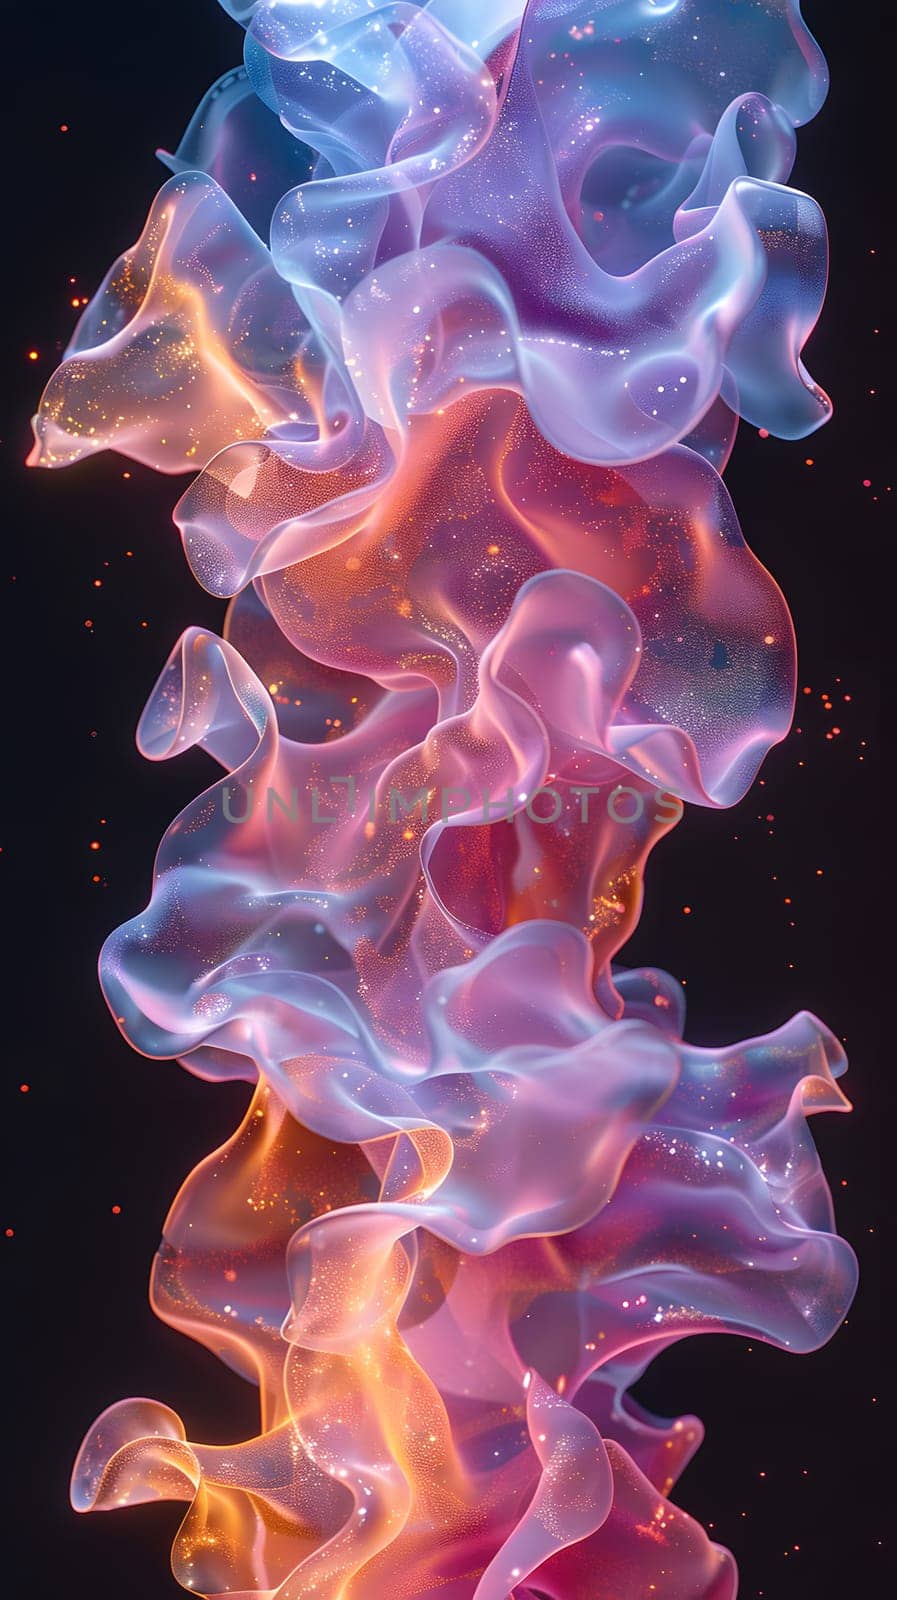 A close up of a vibrant purple smoke swirling out of a bottle against a black background, resembling an electric blue organism with petallike patterns. An artistic display of gas in a unique font